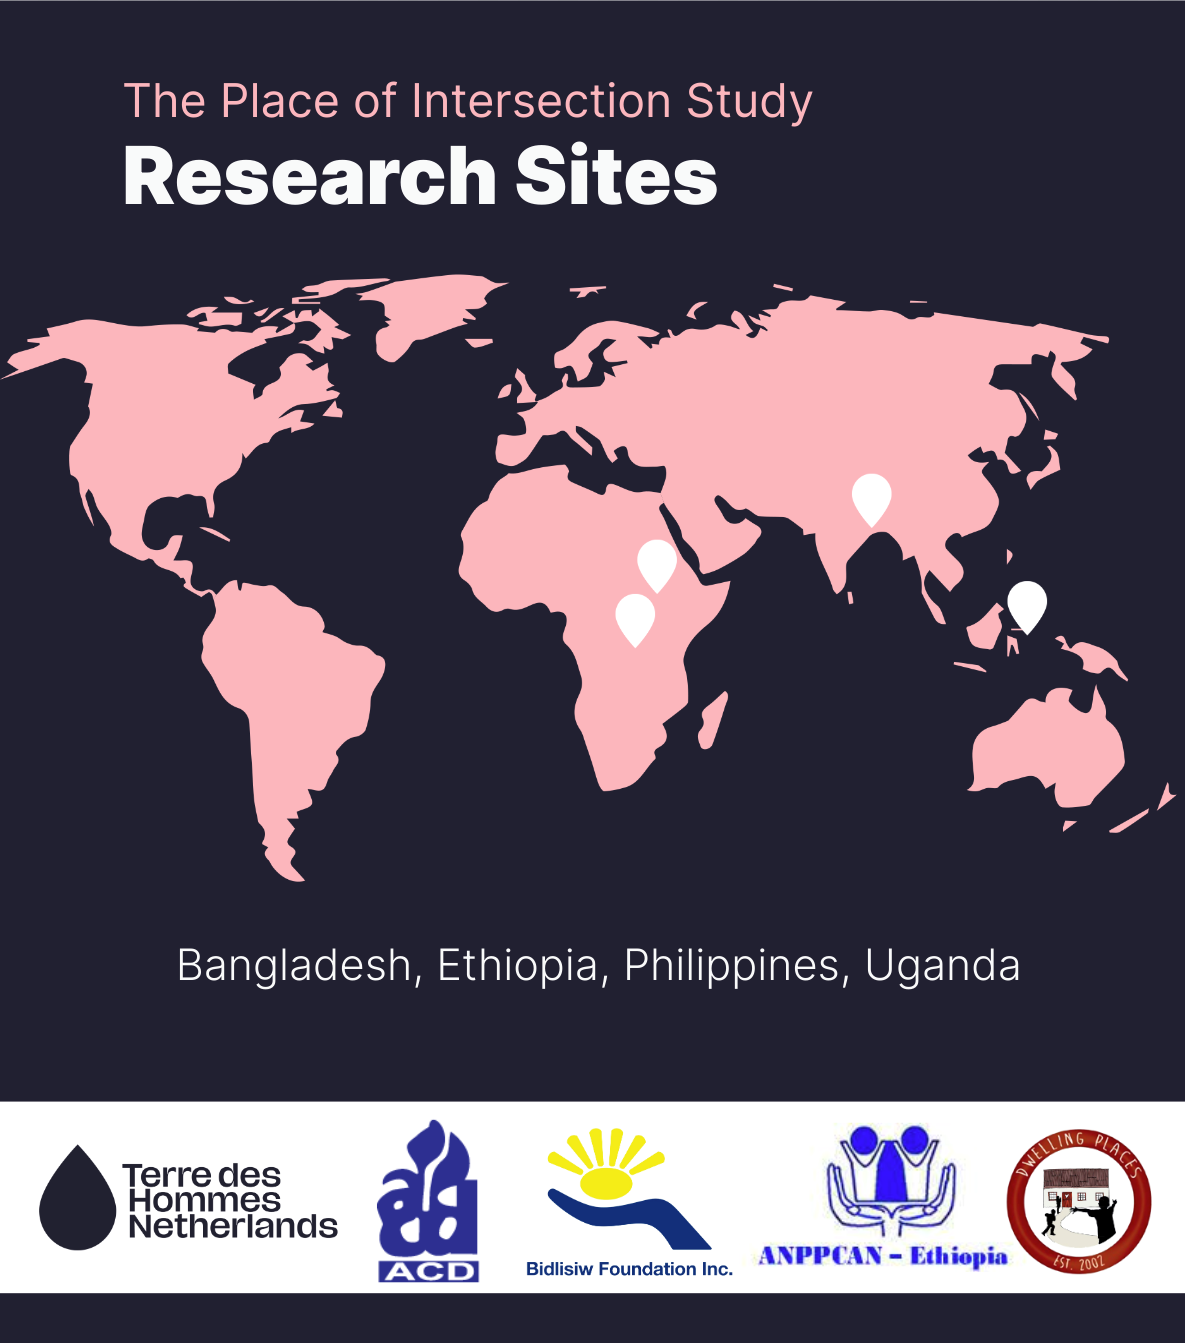 Figure 2. Research sites and partners